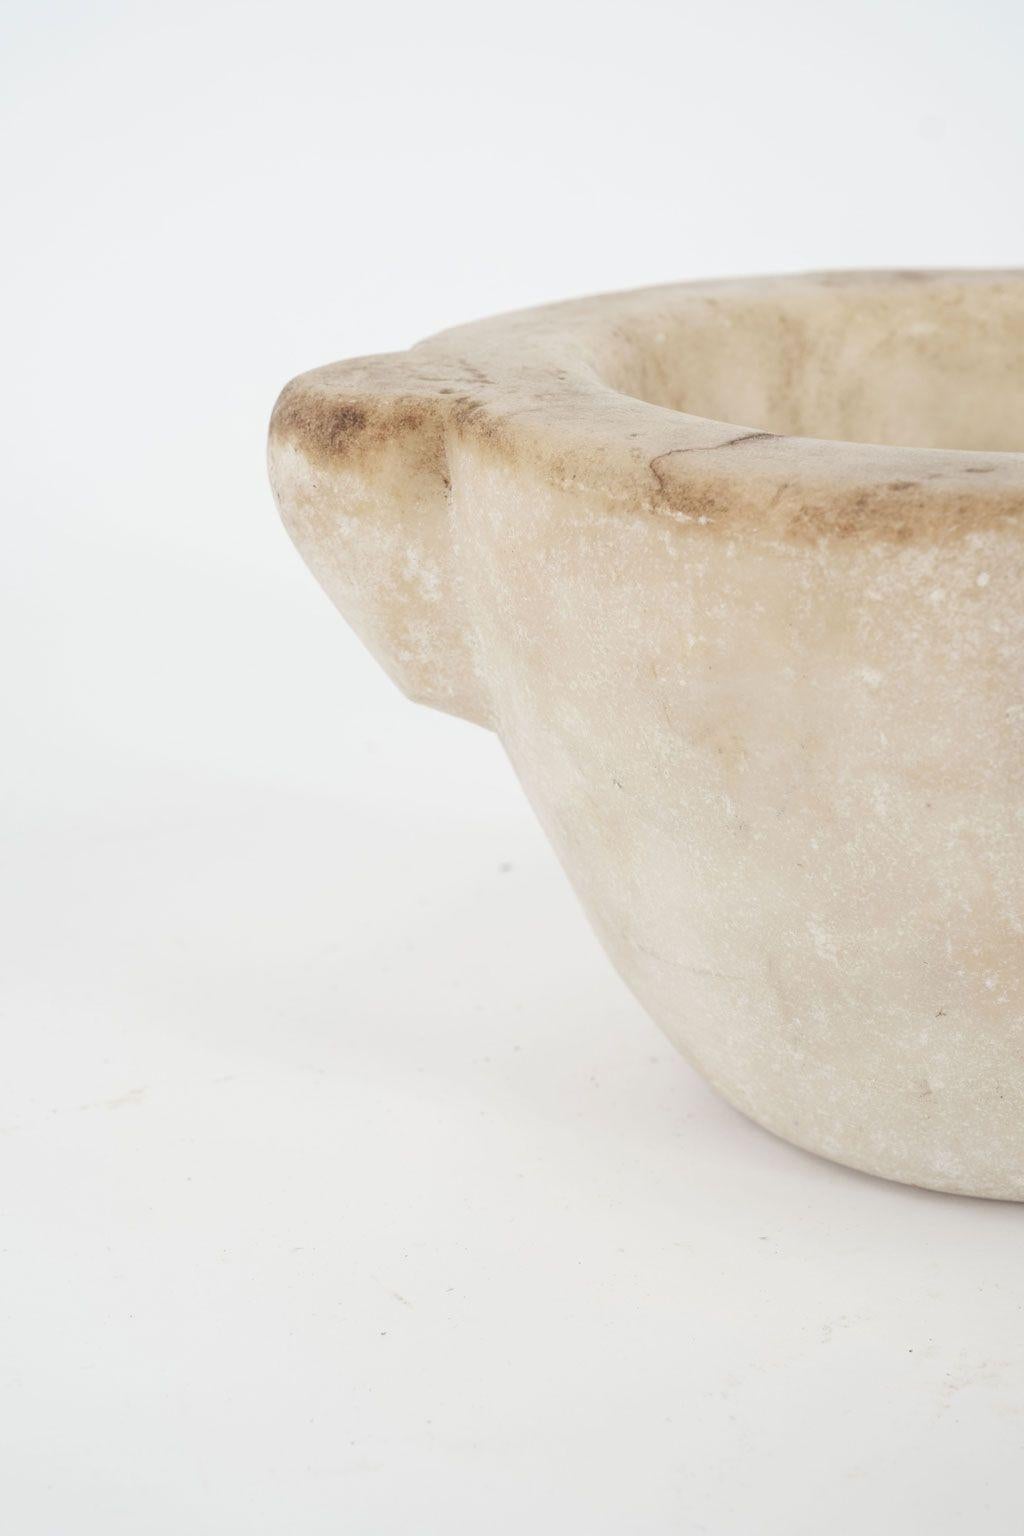 19th century stone mortar from France. Hand-carved alabaster mortar in a conical shape with four handles. Beautiful as a sculptural accent piece or decorative bowl. Seven stone mortars of varying shapes and sizes are available (see last image). All